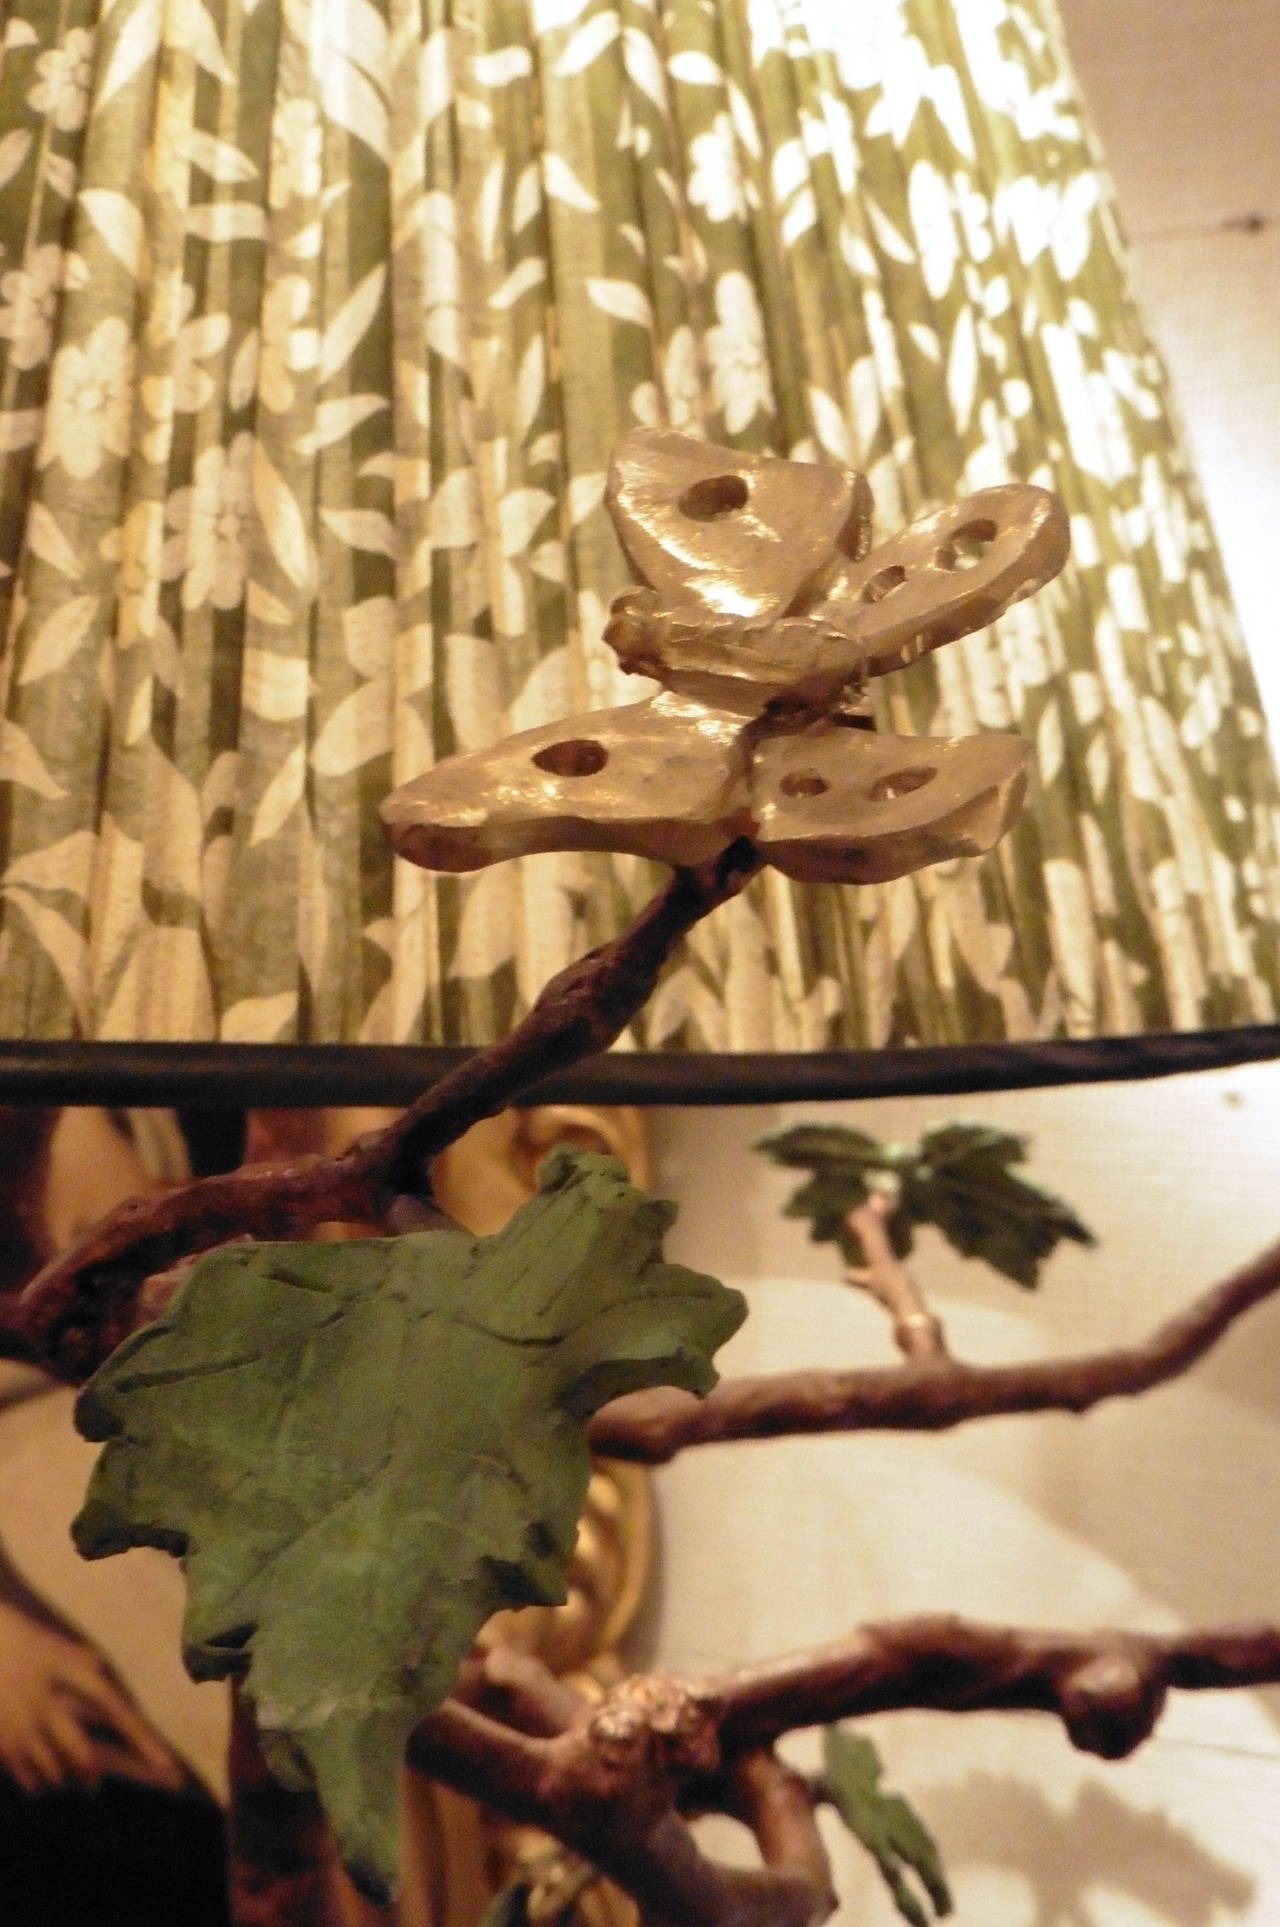 Enchanting Paula Swinnen branch design standard lamp in a light brown patina with green leaves and gilt bronze bird, dragonfly and snail. Signed and dated by the artist 2014. Wired UK. Includes vintage green sari shade.

Guinevere Antiques has